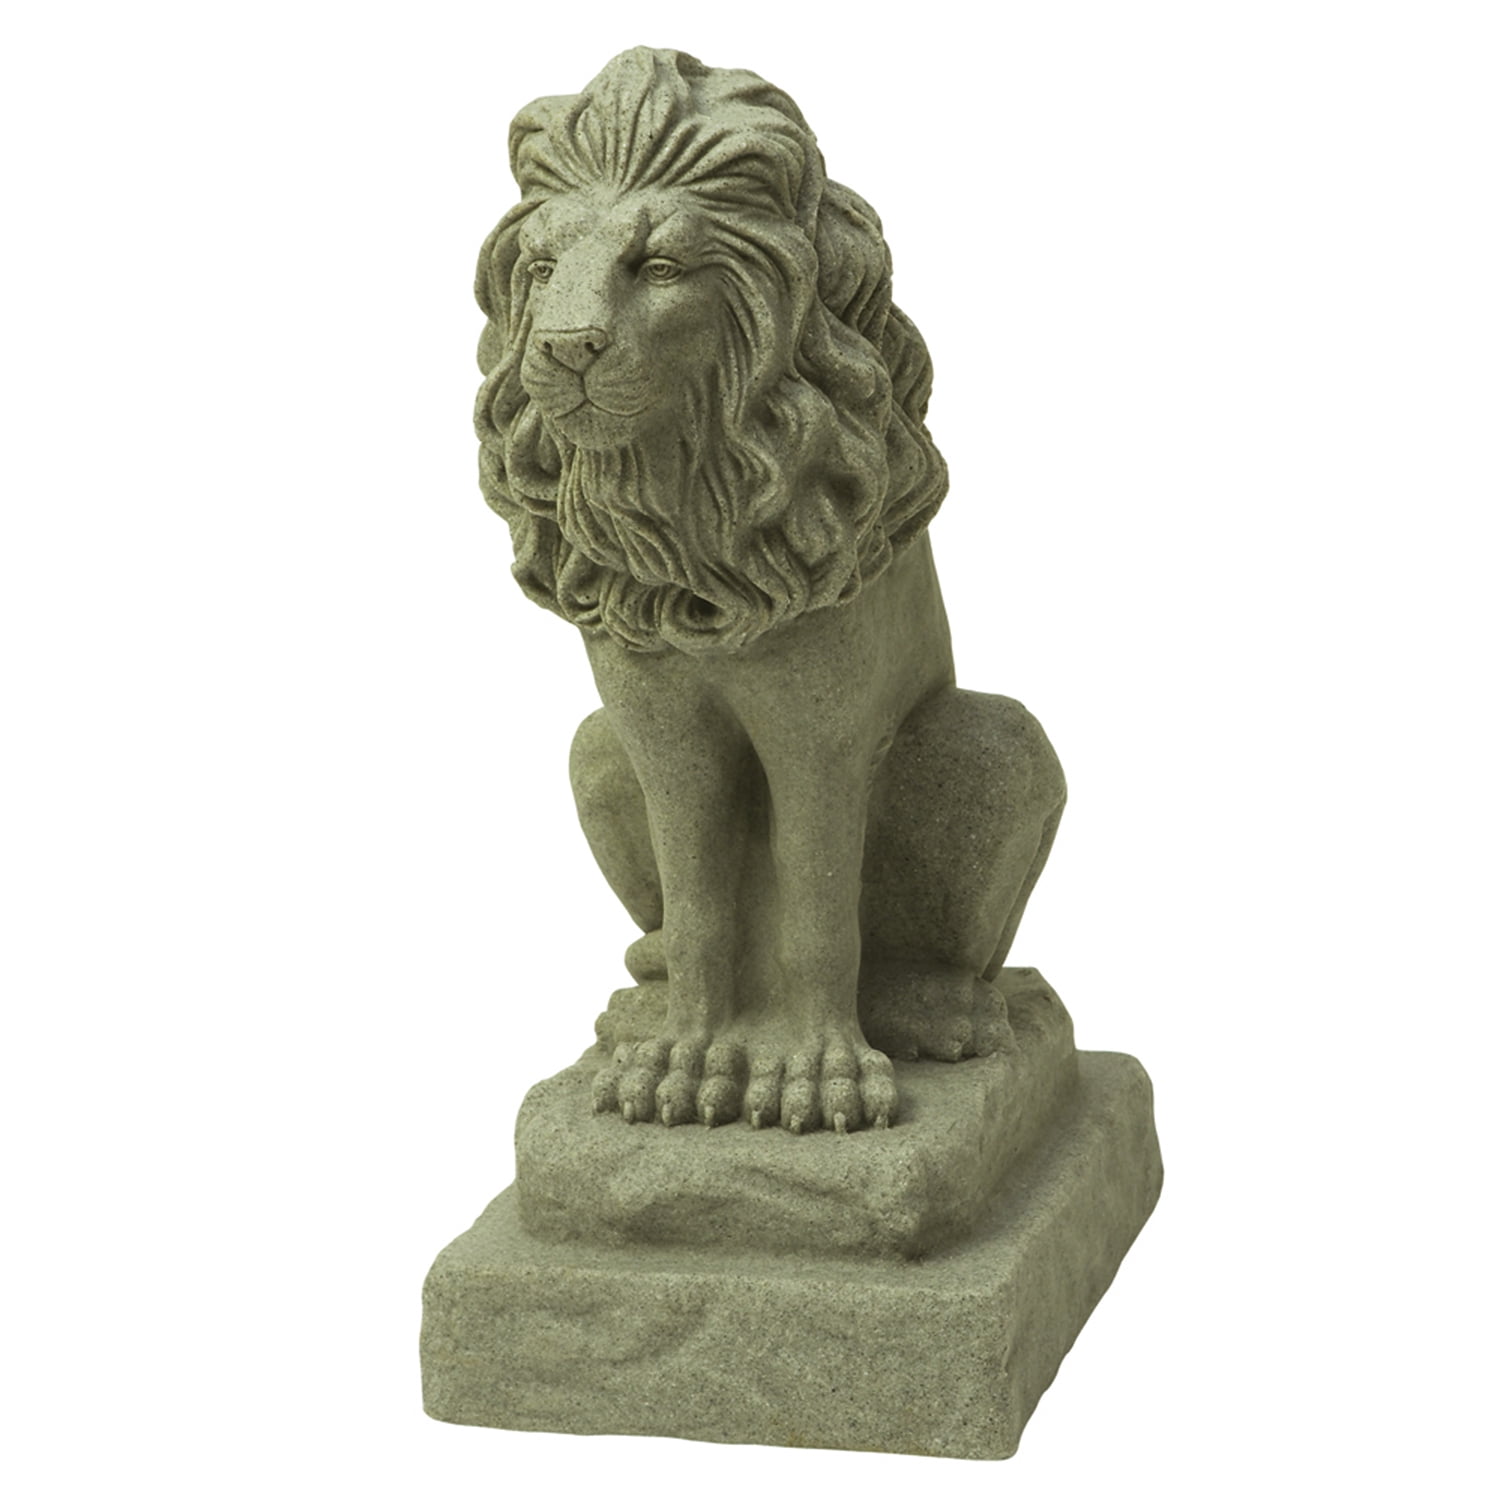 Emsco Group Guardian Lion Statue Natural Sandstone Appearance Made of Resin for sale online 